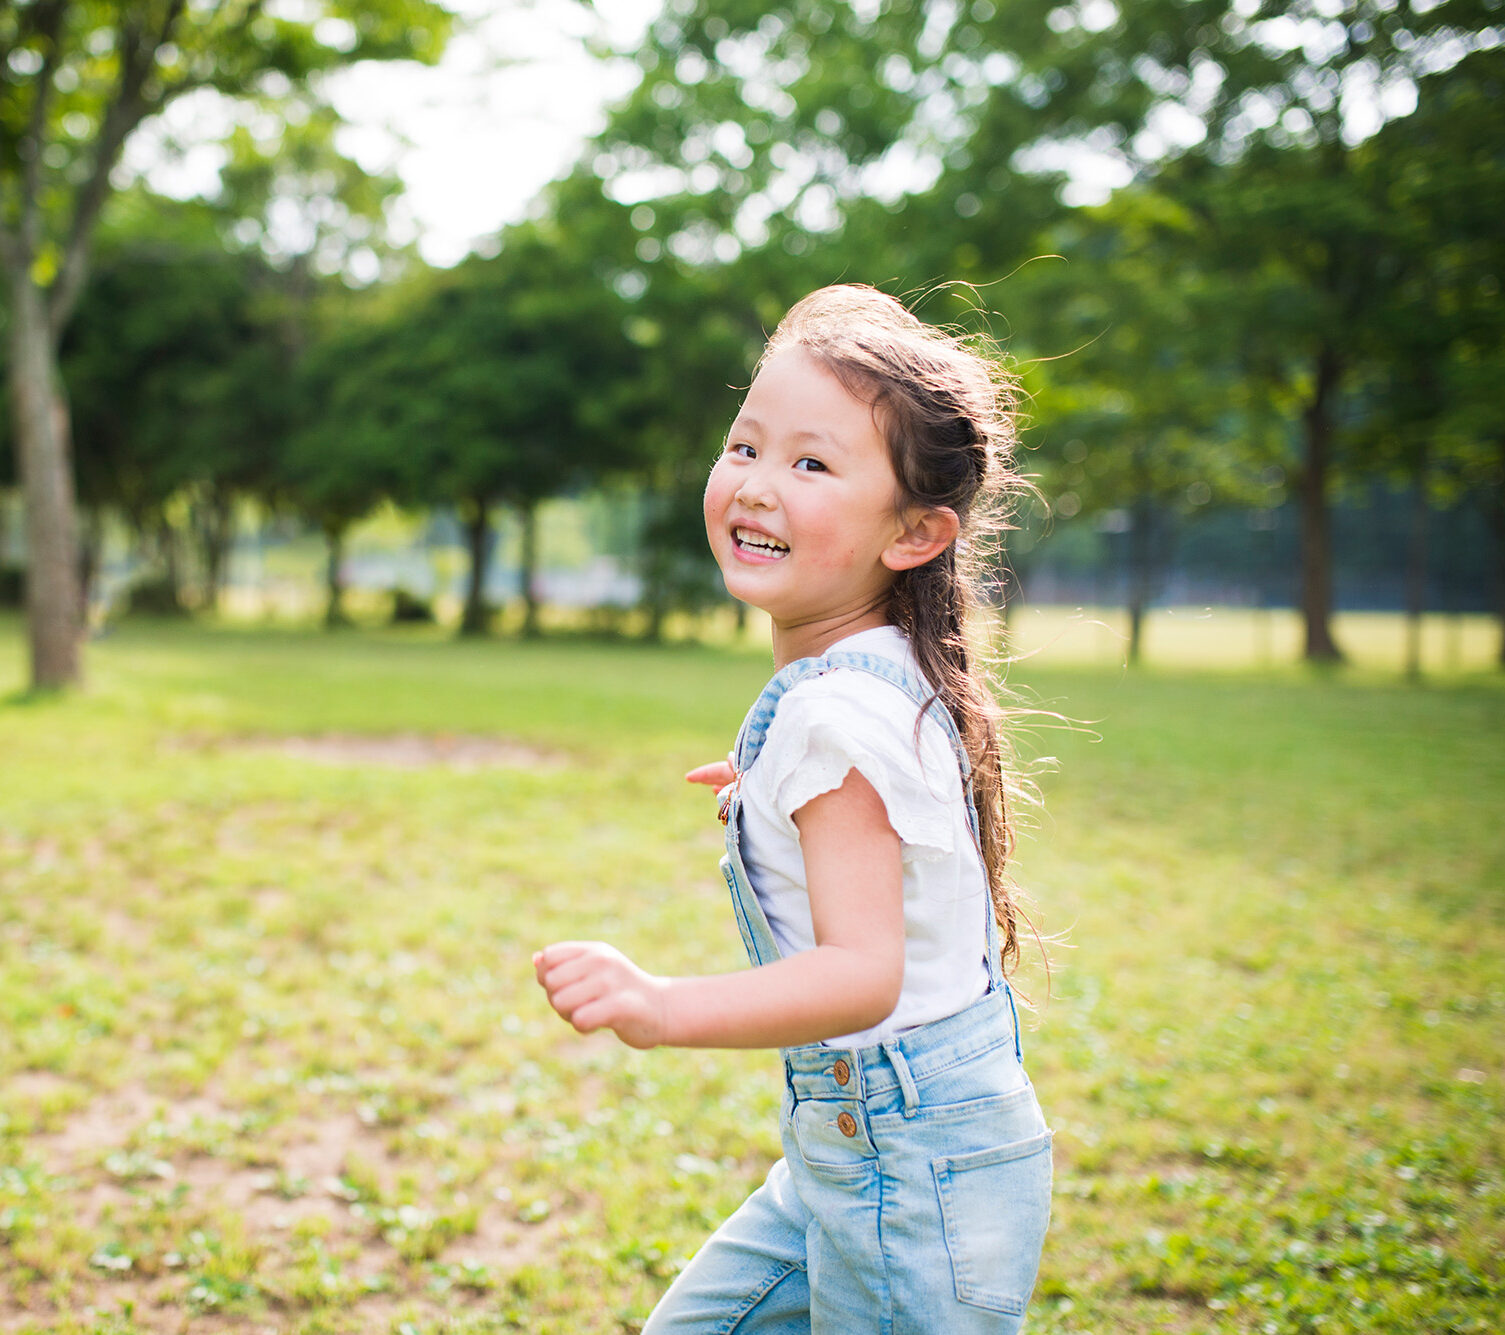 Young Asian girl playing outside smiling and running.